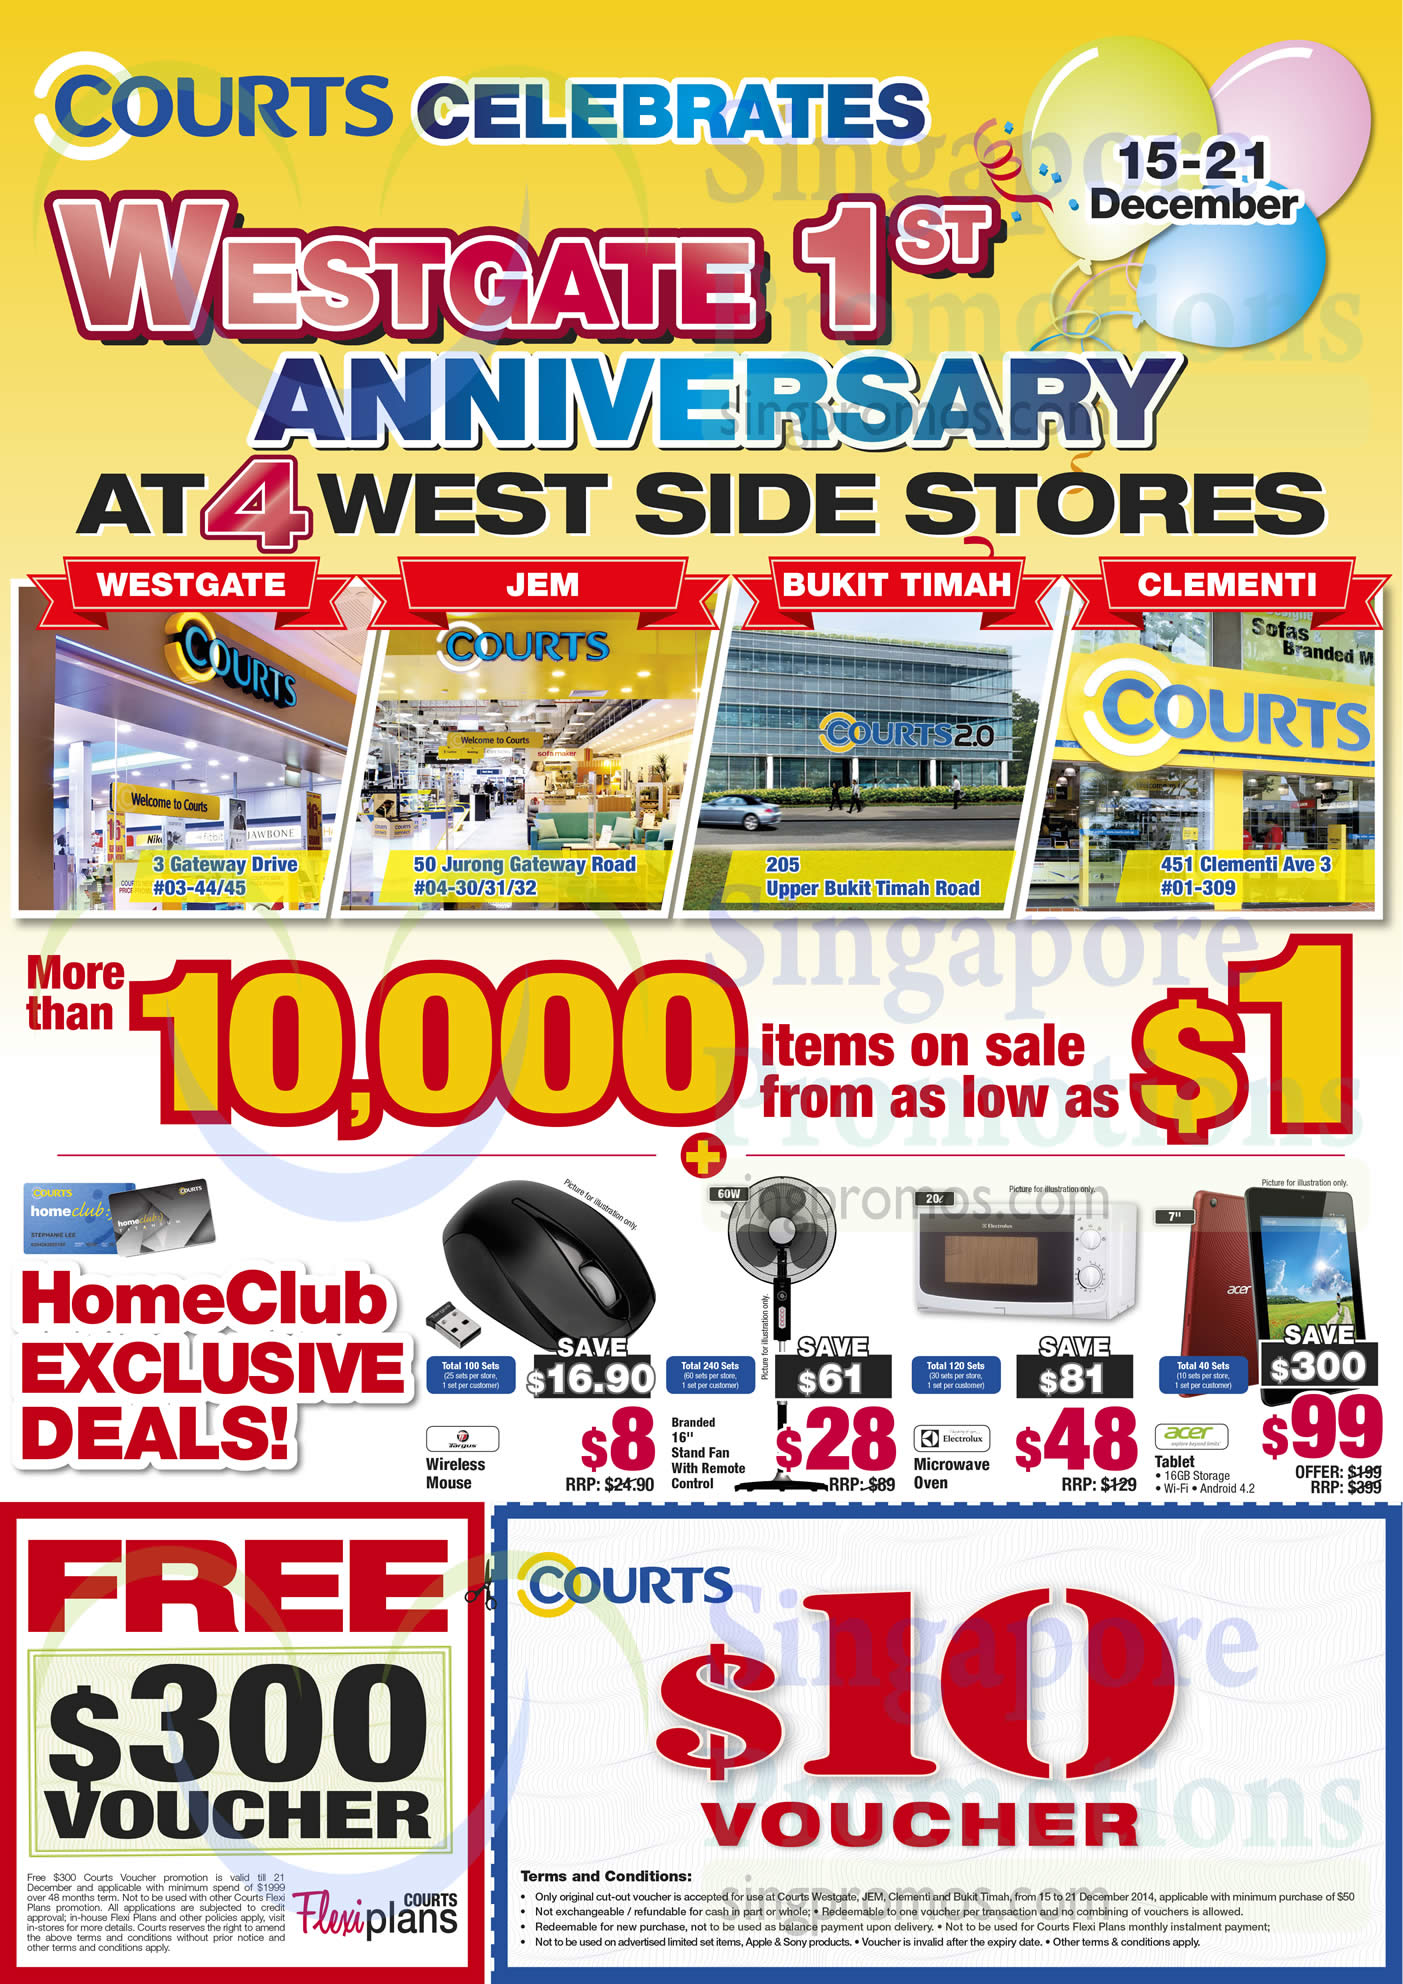 Featured image for Courts West Outlets First Anniversary Specials 15 - 21 Dec 2014